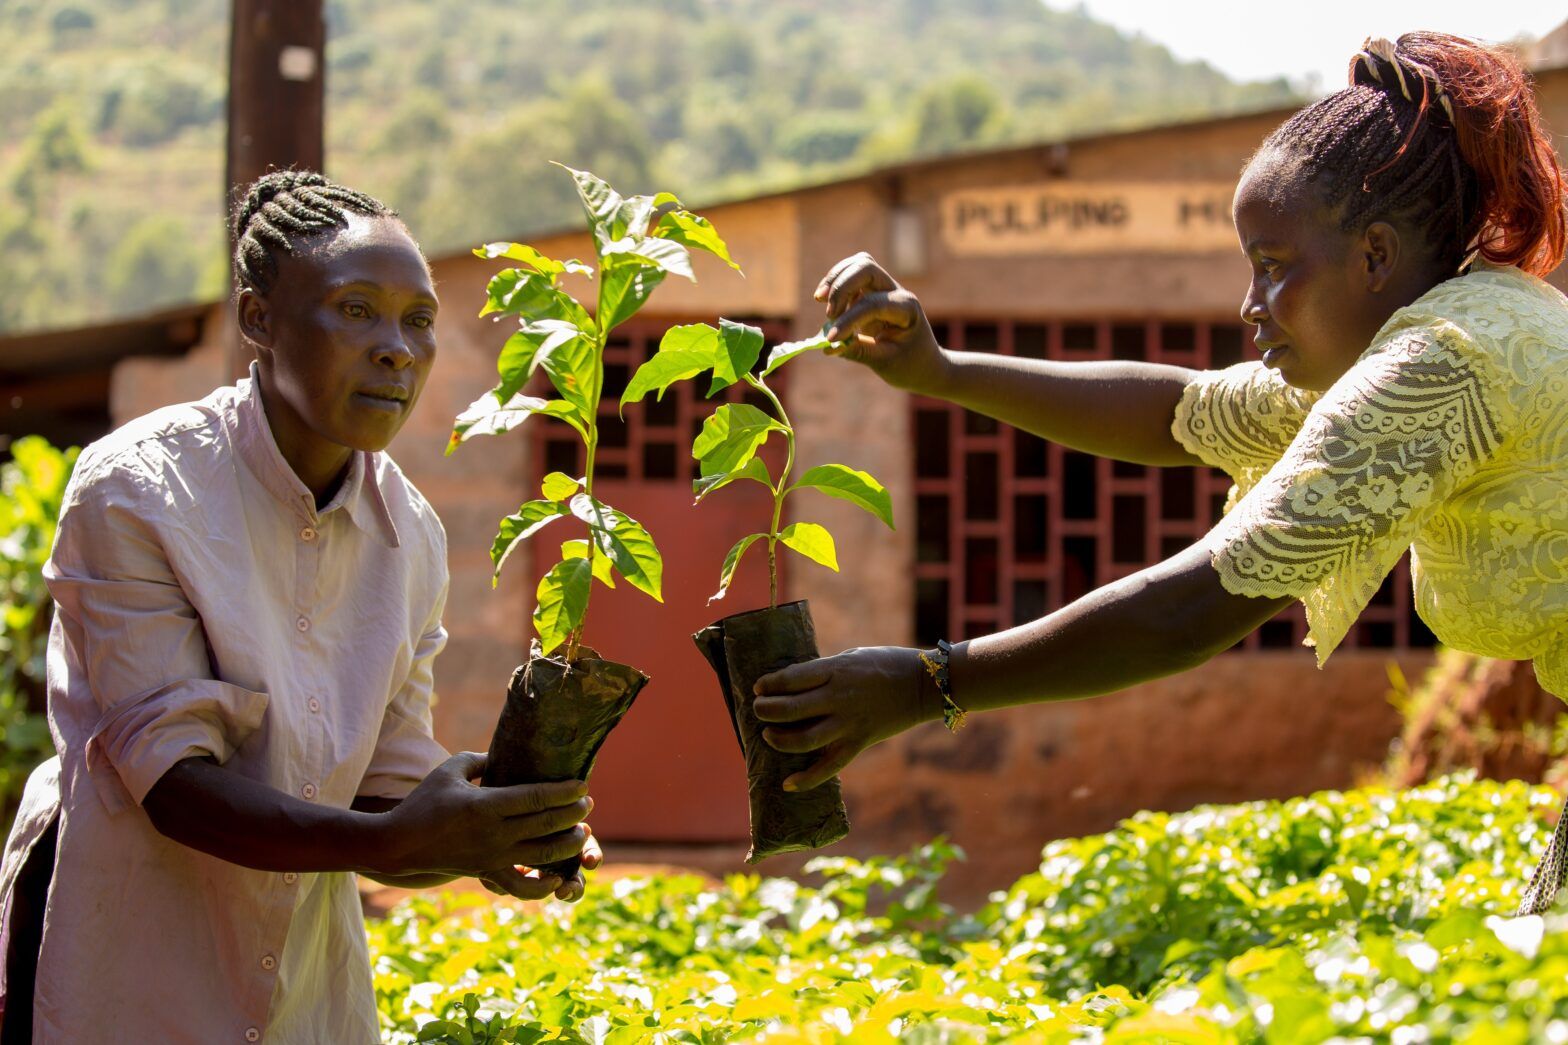 How investors can support farming communities